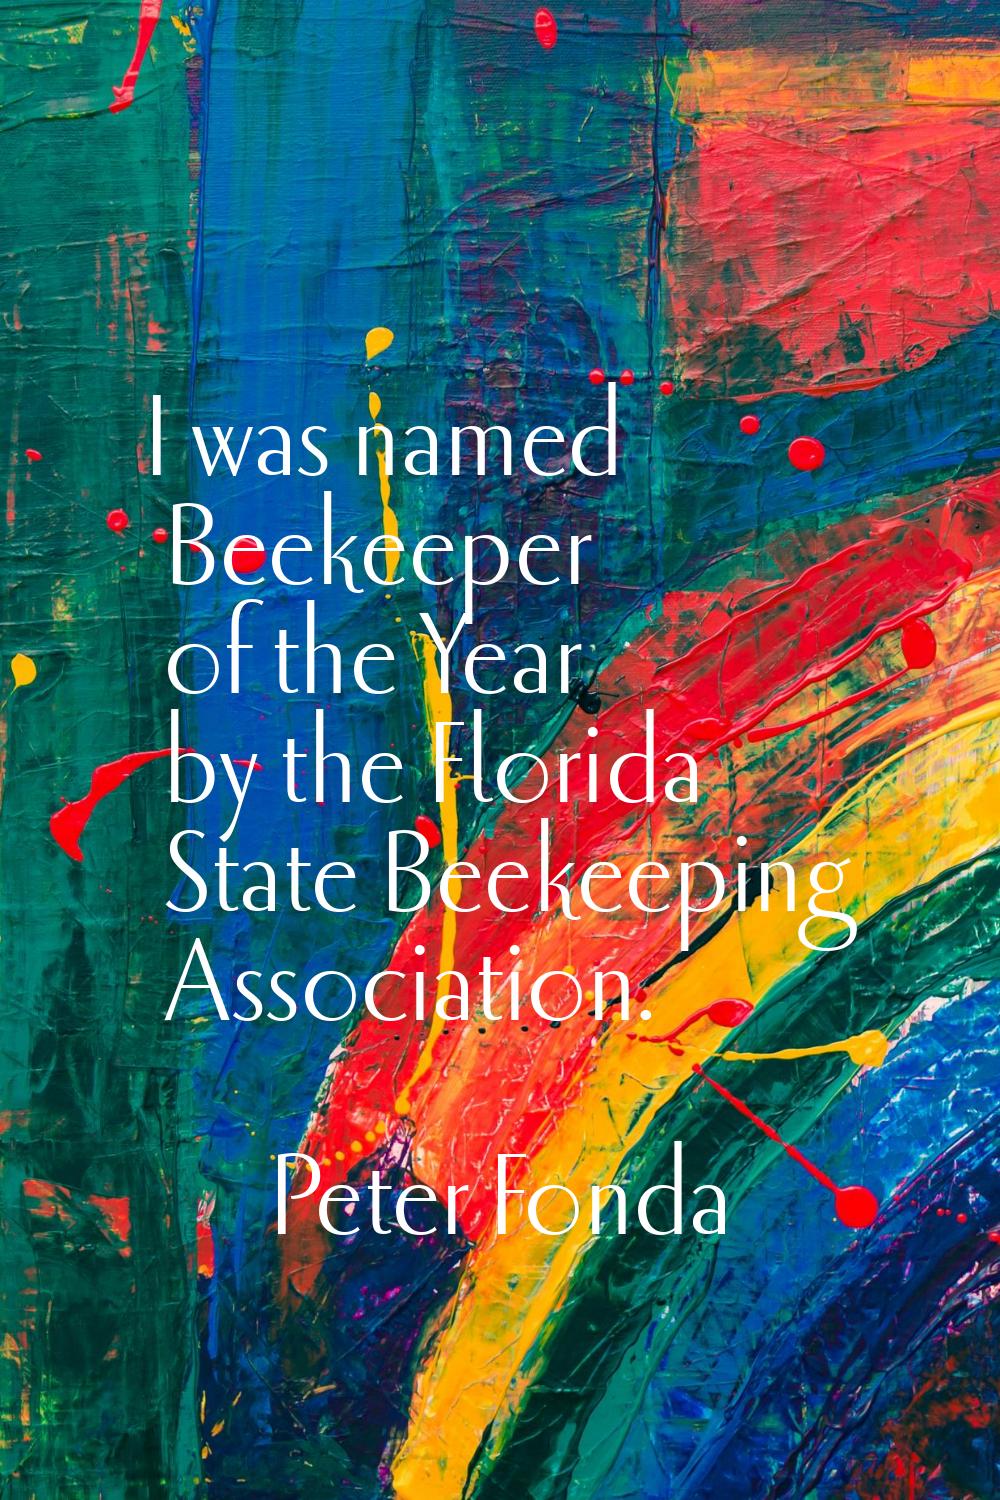 I was named Beekeeper of the Year by the Florida State Beekeeping Association.